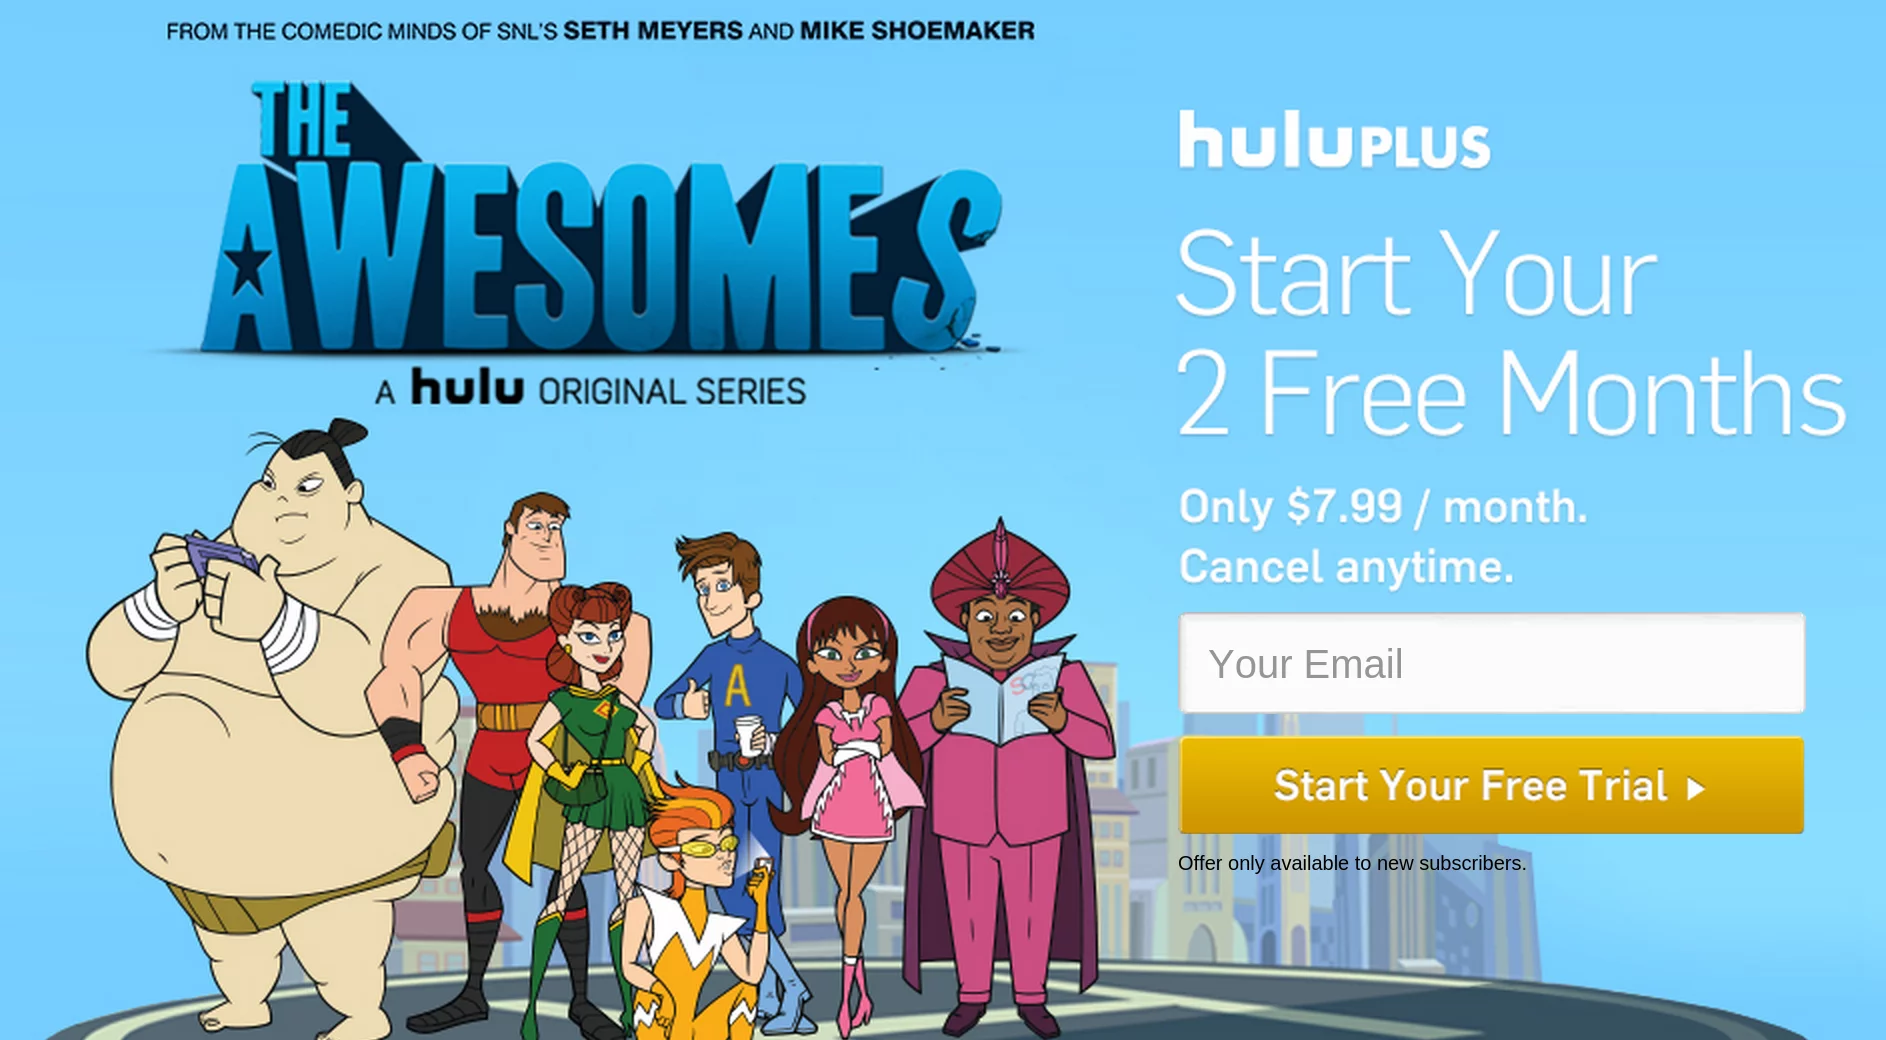 Hulu 2 months - for some reason we don't have an alt tag here